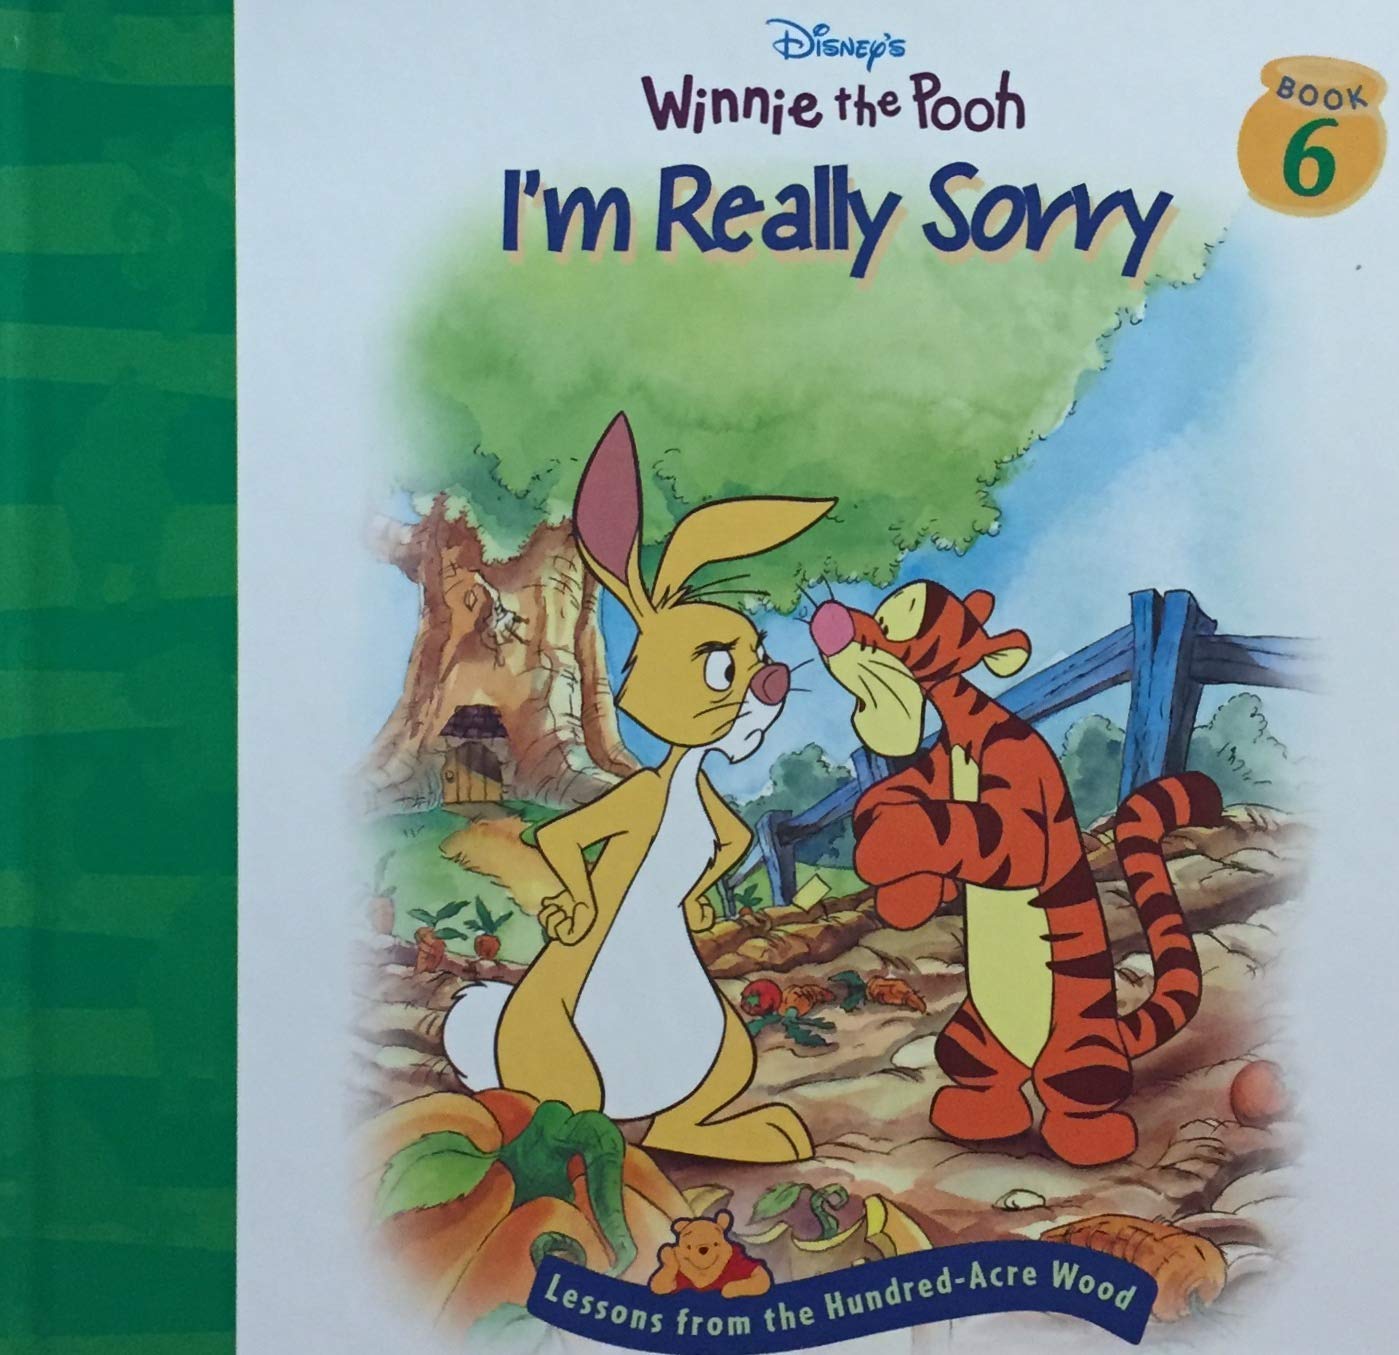 Winnie the Pooh (Lessons from the Hundred-Acre Wood) # 6 : I'm Really Sorry - Disney